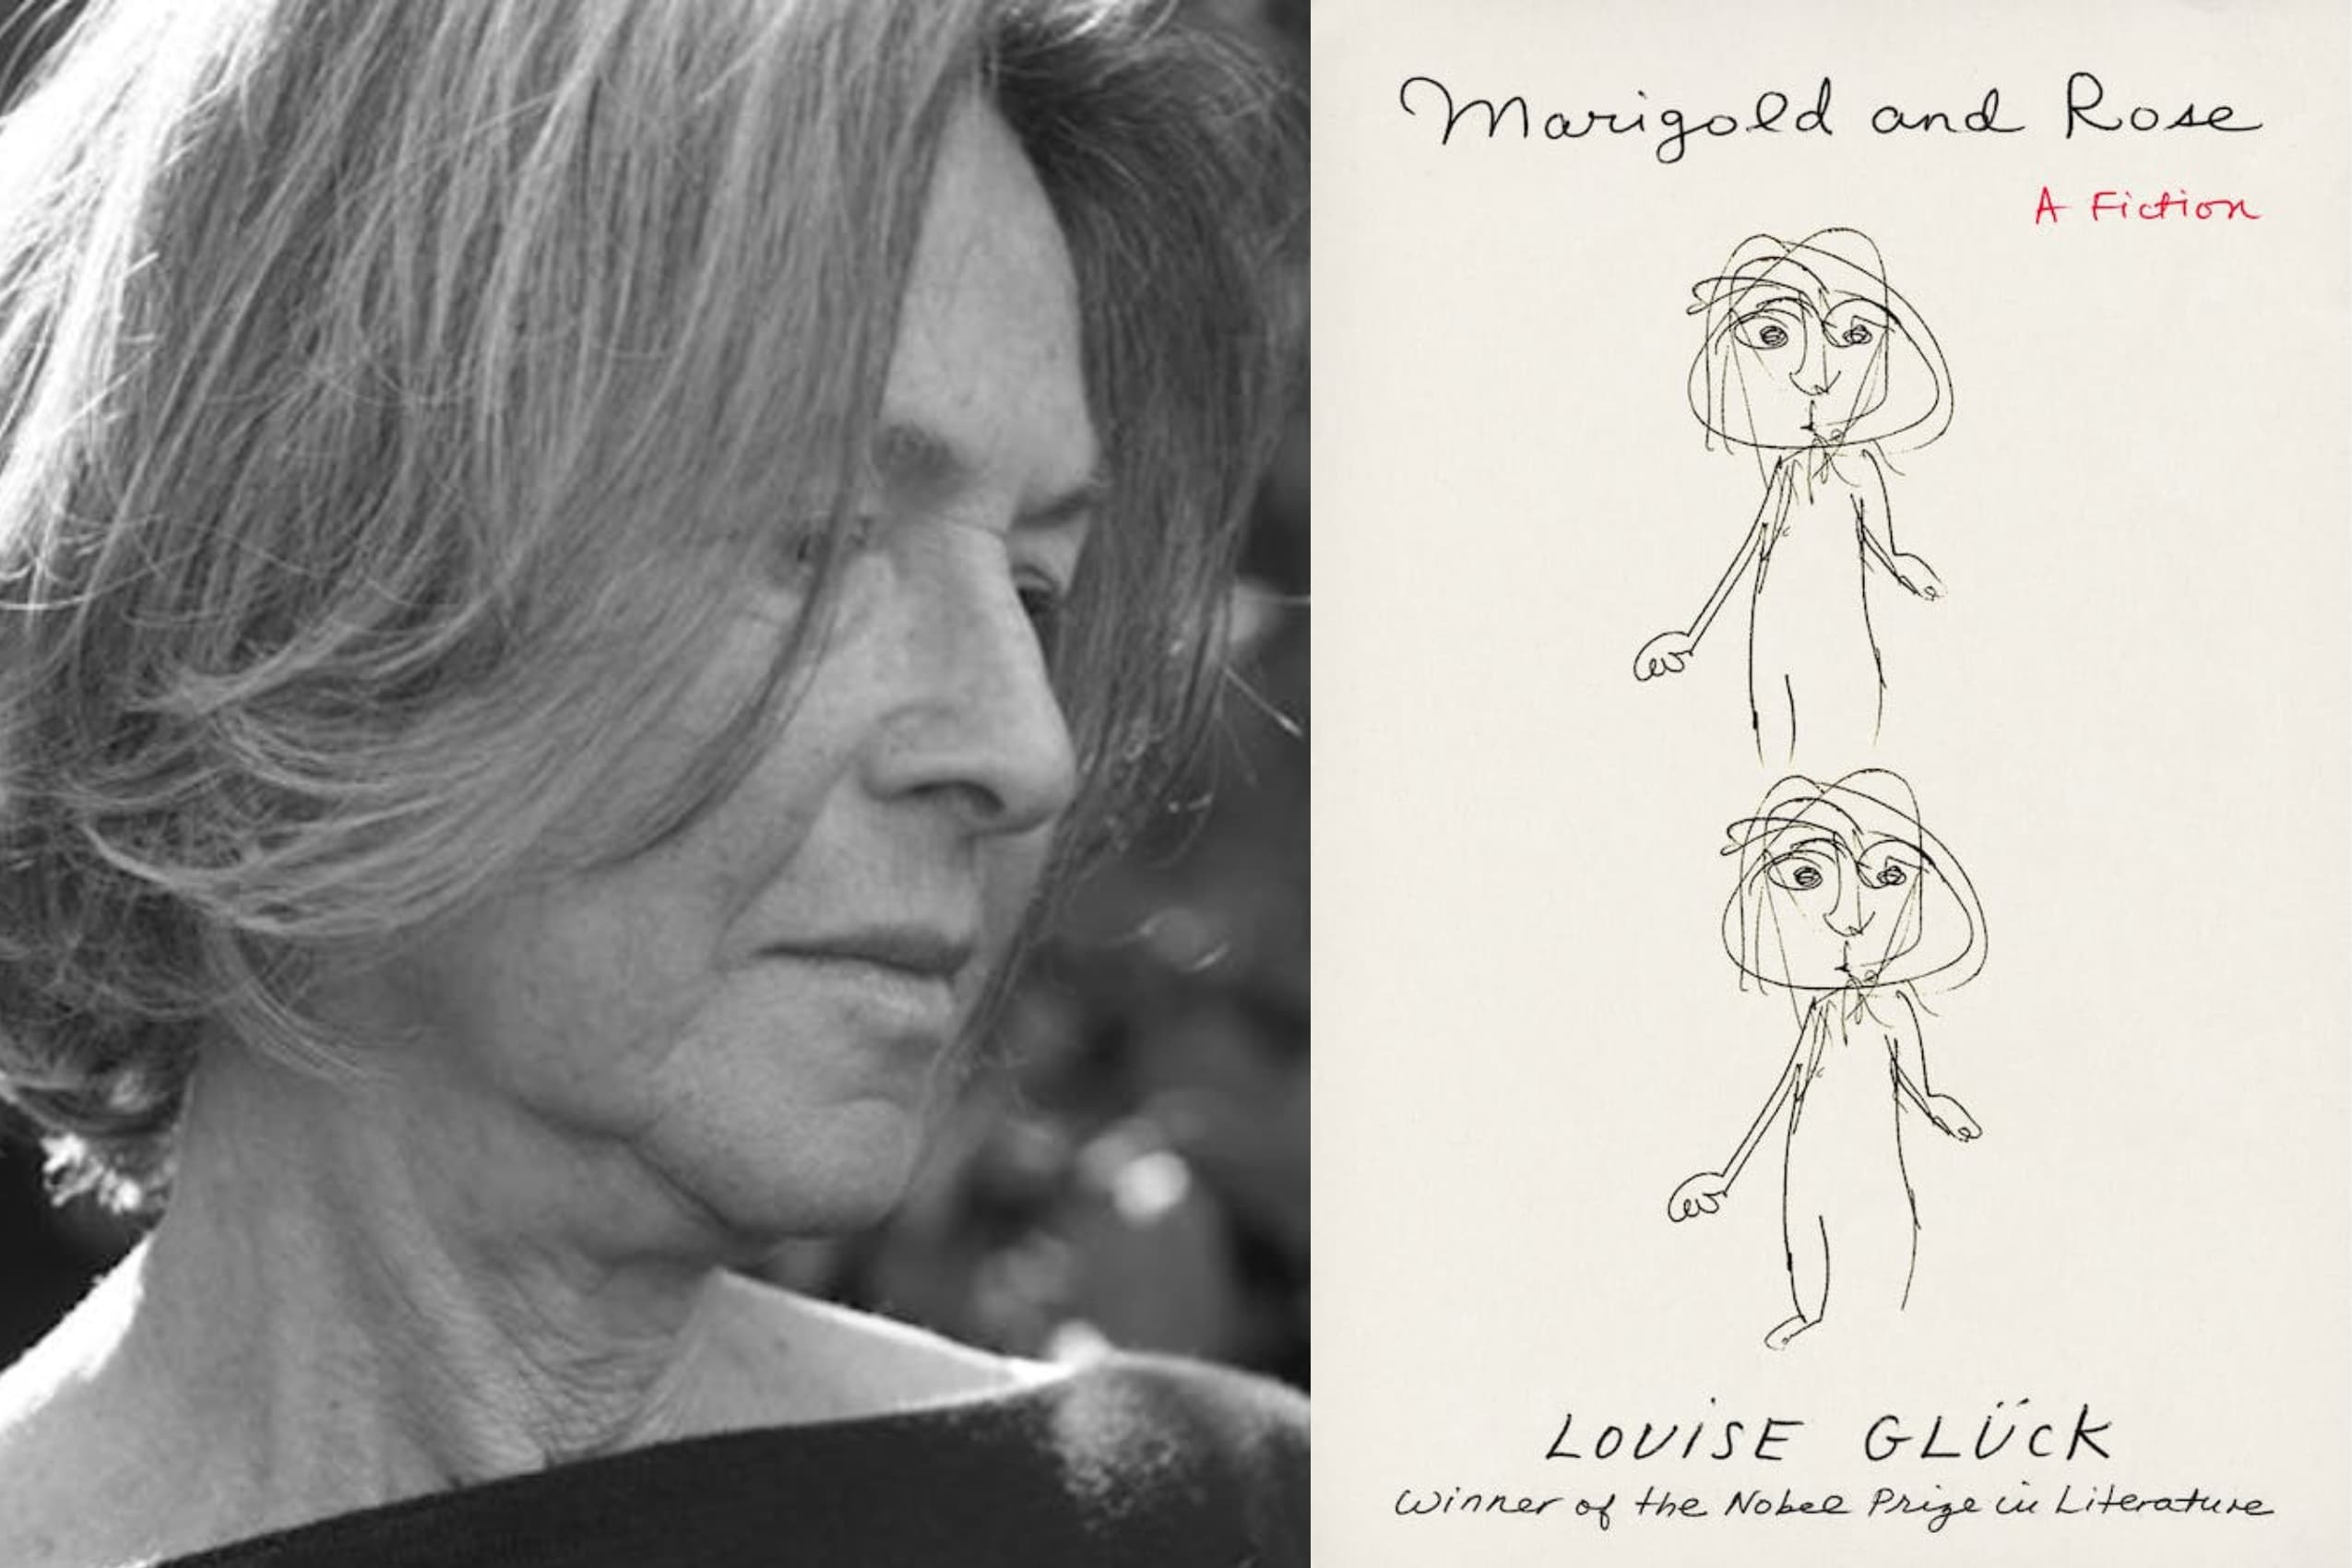 Louise Gluck's latest book 